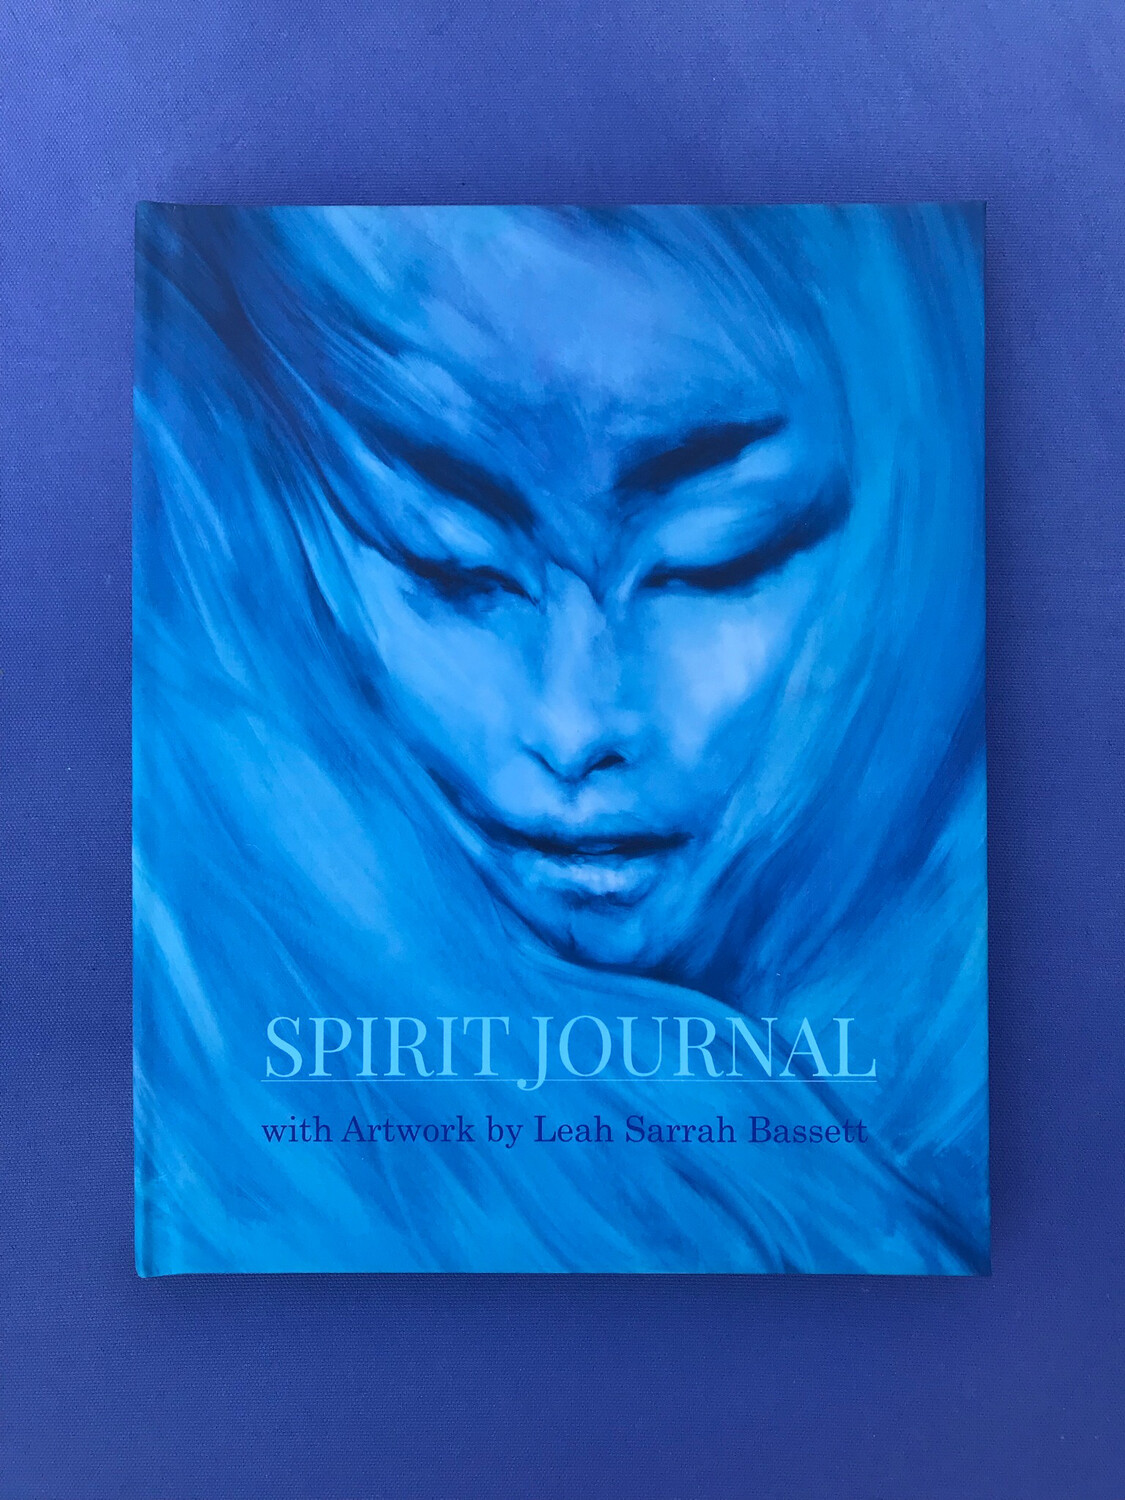 SPIRIT JOURNAL (Signed By Me With A Message)